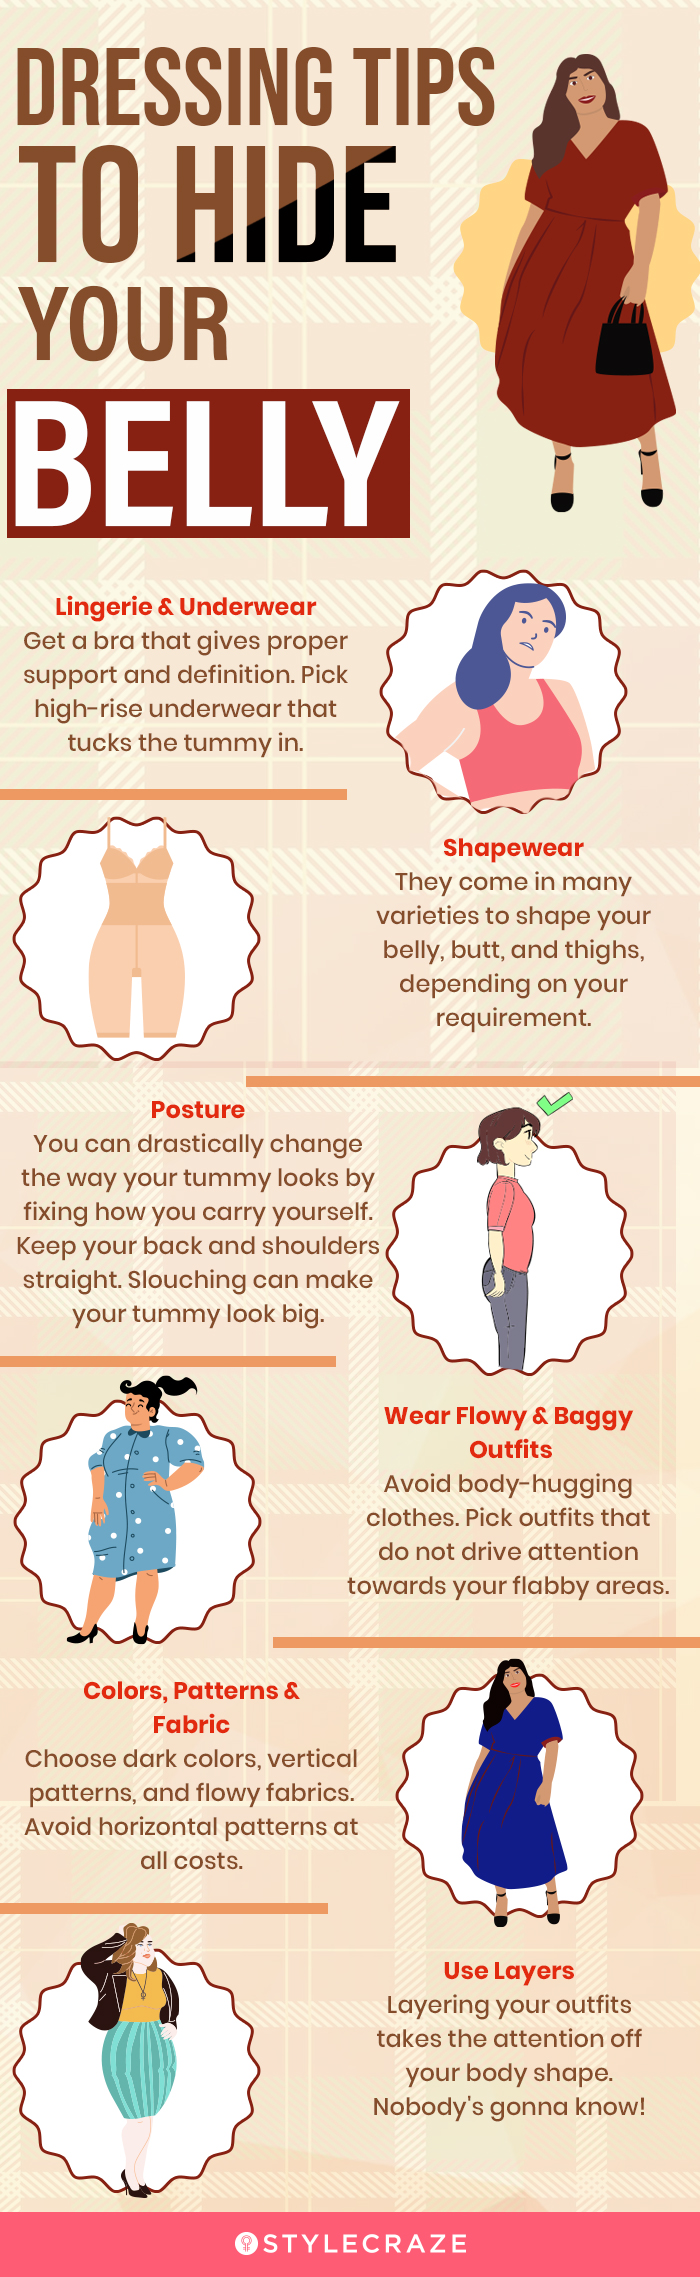 dressing tips to hide your belly [infographic]